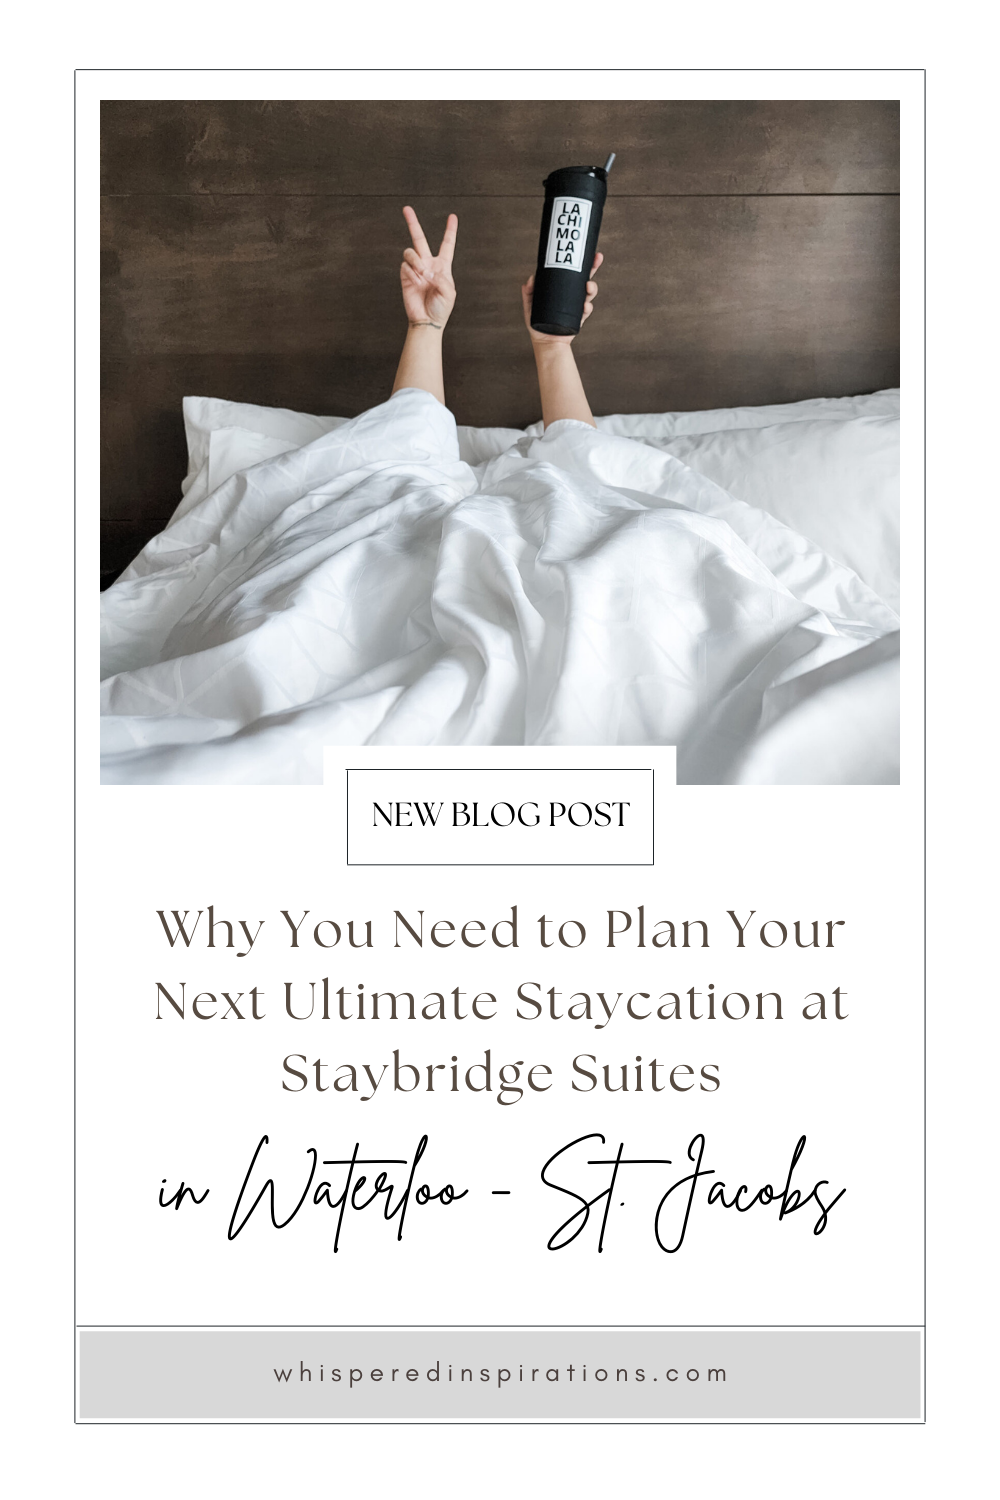 Nancy lies under the covers with her iced coffee and giving a peace sign. Her cup reads, "Lachimolala." This article covers how to plan your next ultimate staycation at Staybridge Suites in Waterloo-St. Jacobs.